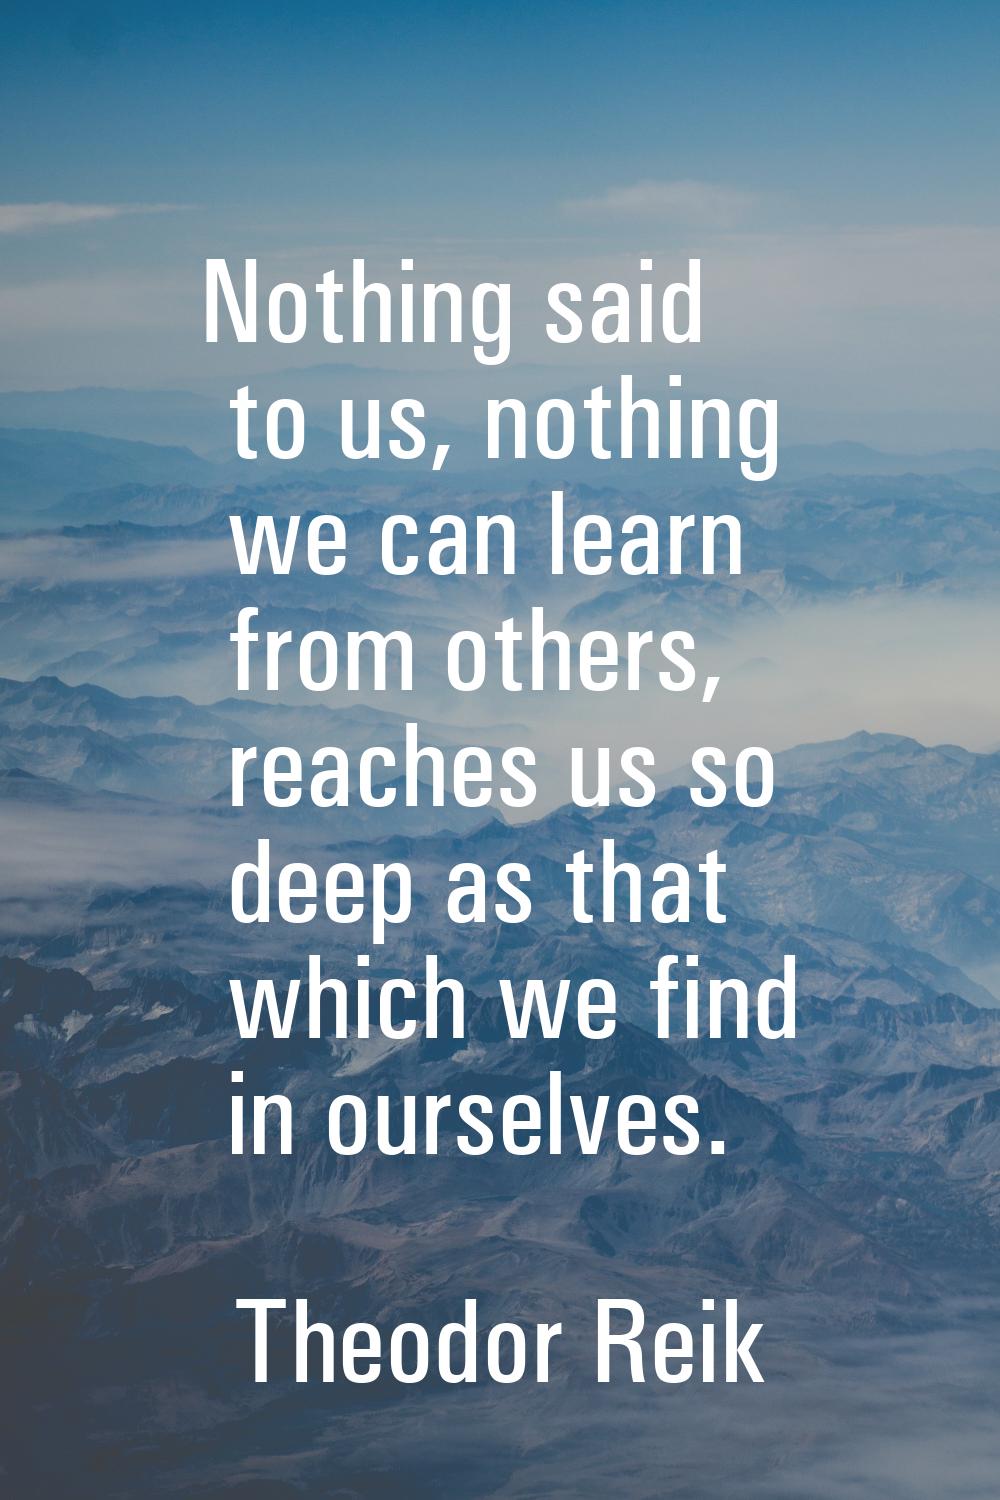 Nothing said to us, nothing we can learn from others, reaches us so deep as that which we find in o